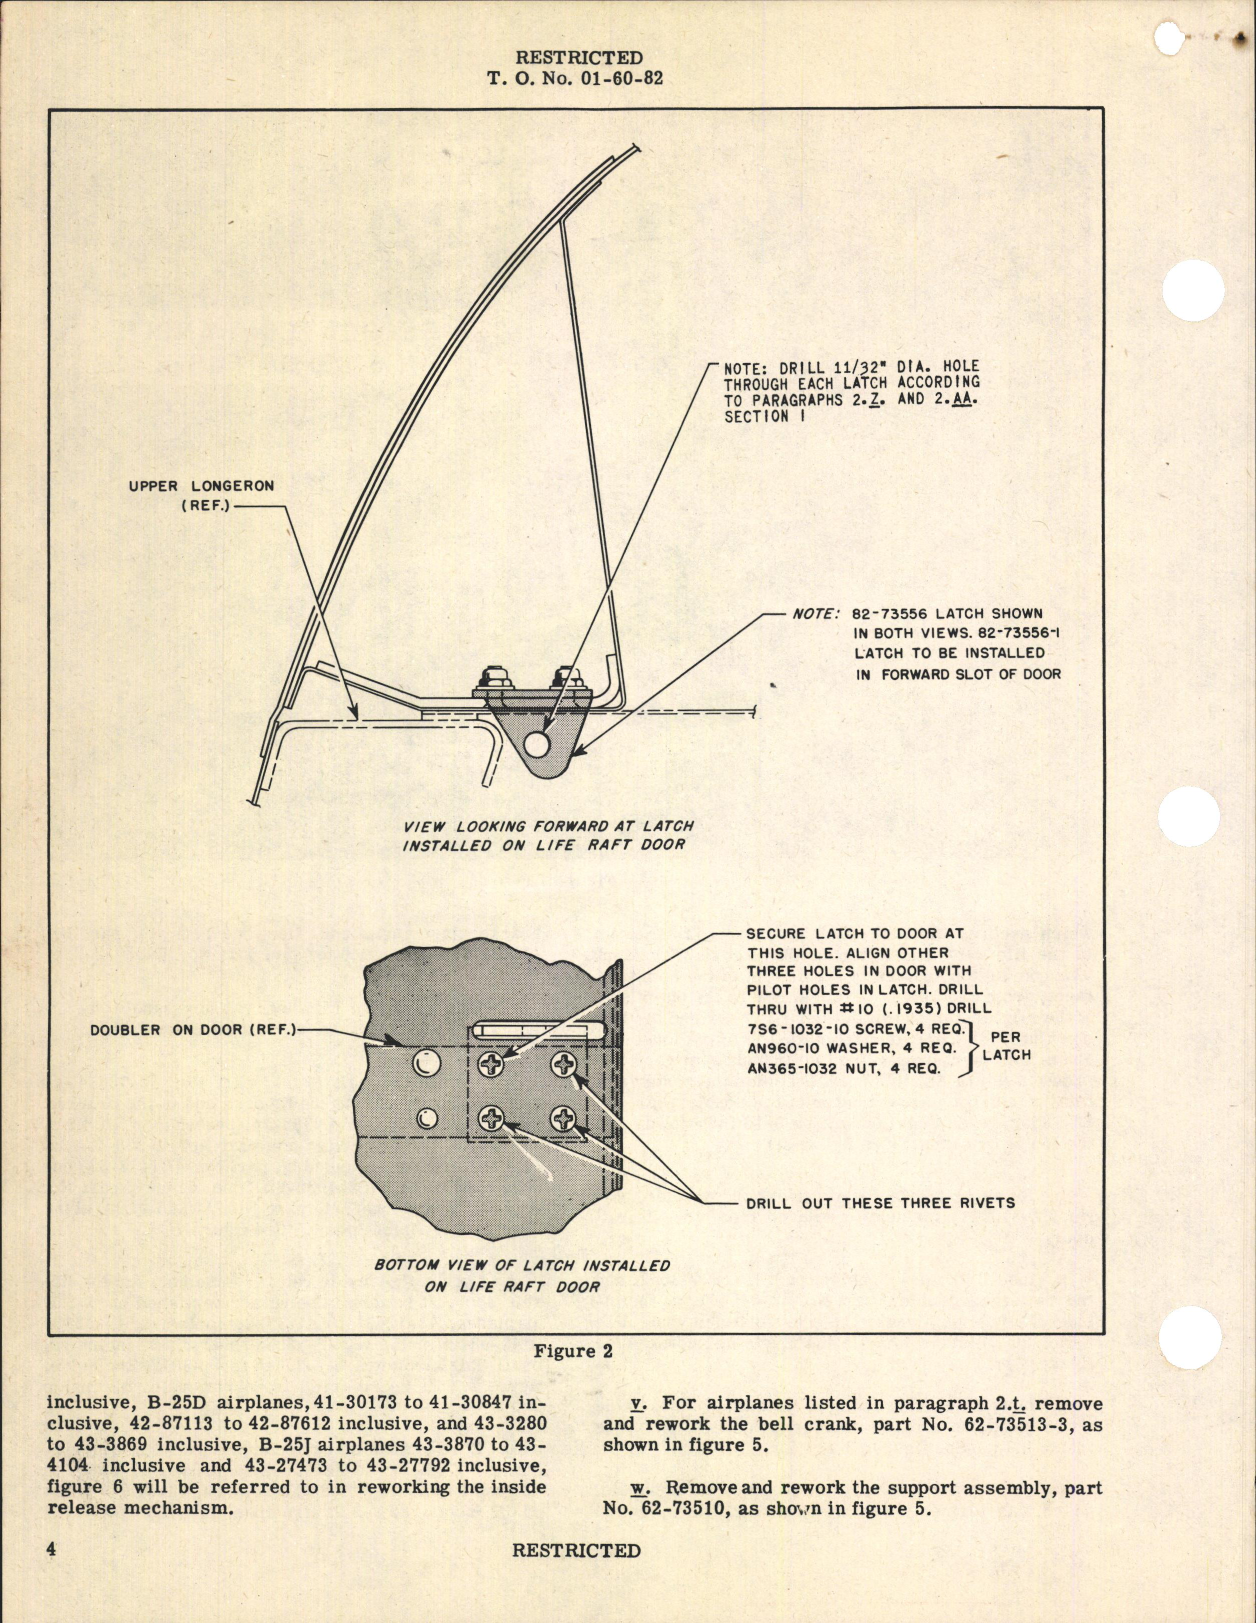 Sample page 4 from AirCorps Library document: Rework of Life Raft Release Mechanism for B-25